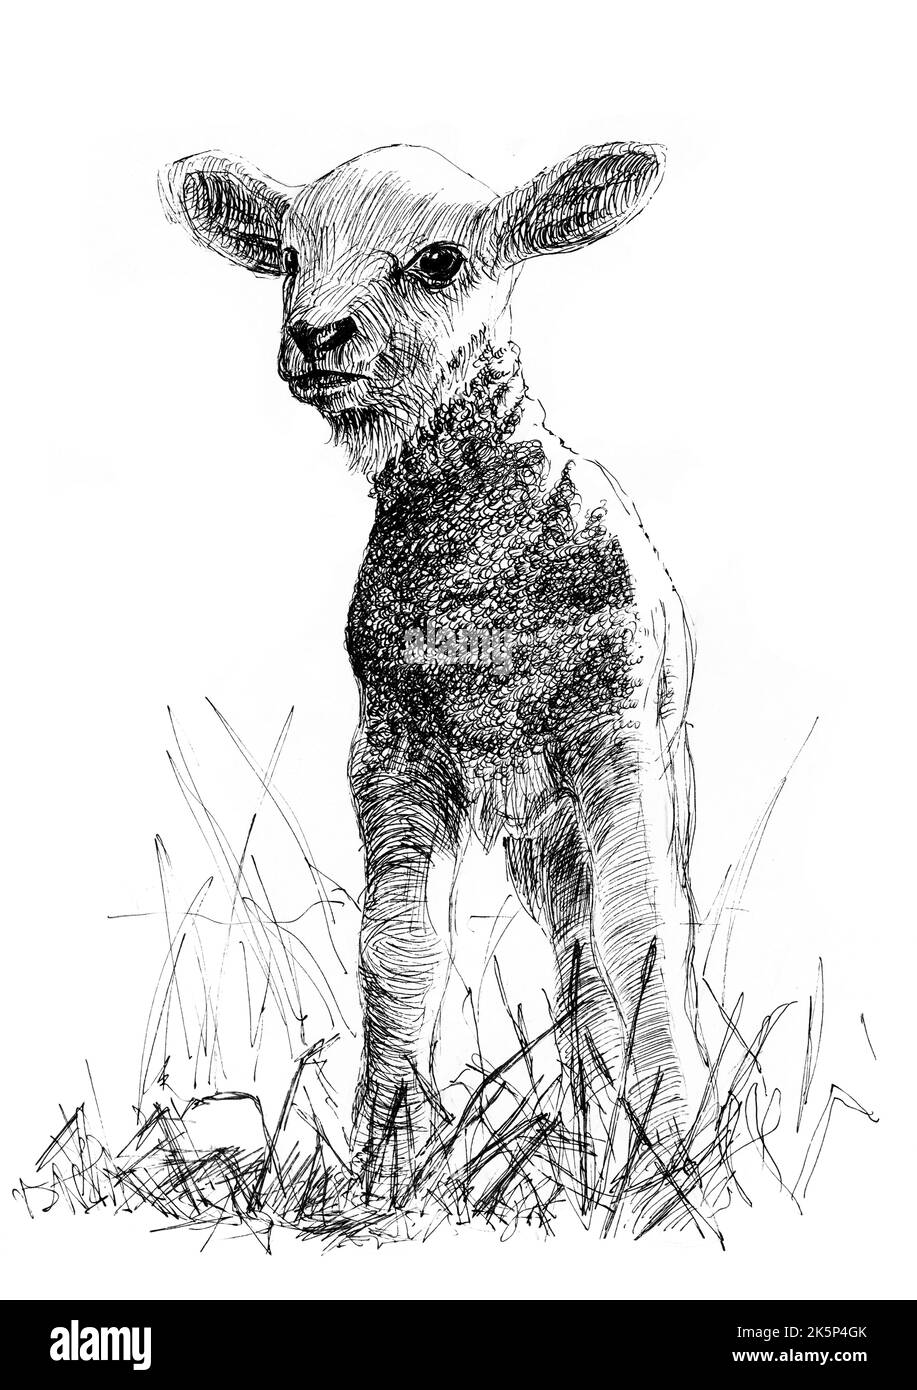 A little sheep standing in a meadow. Black and white pen drawing. Stock Photo